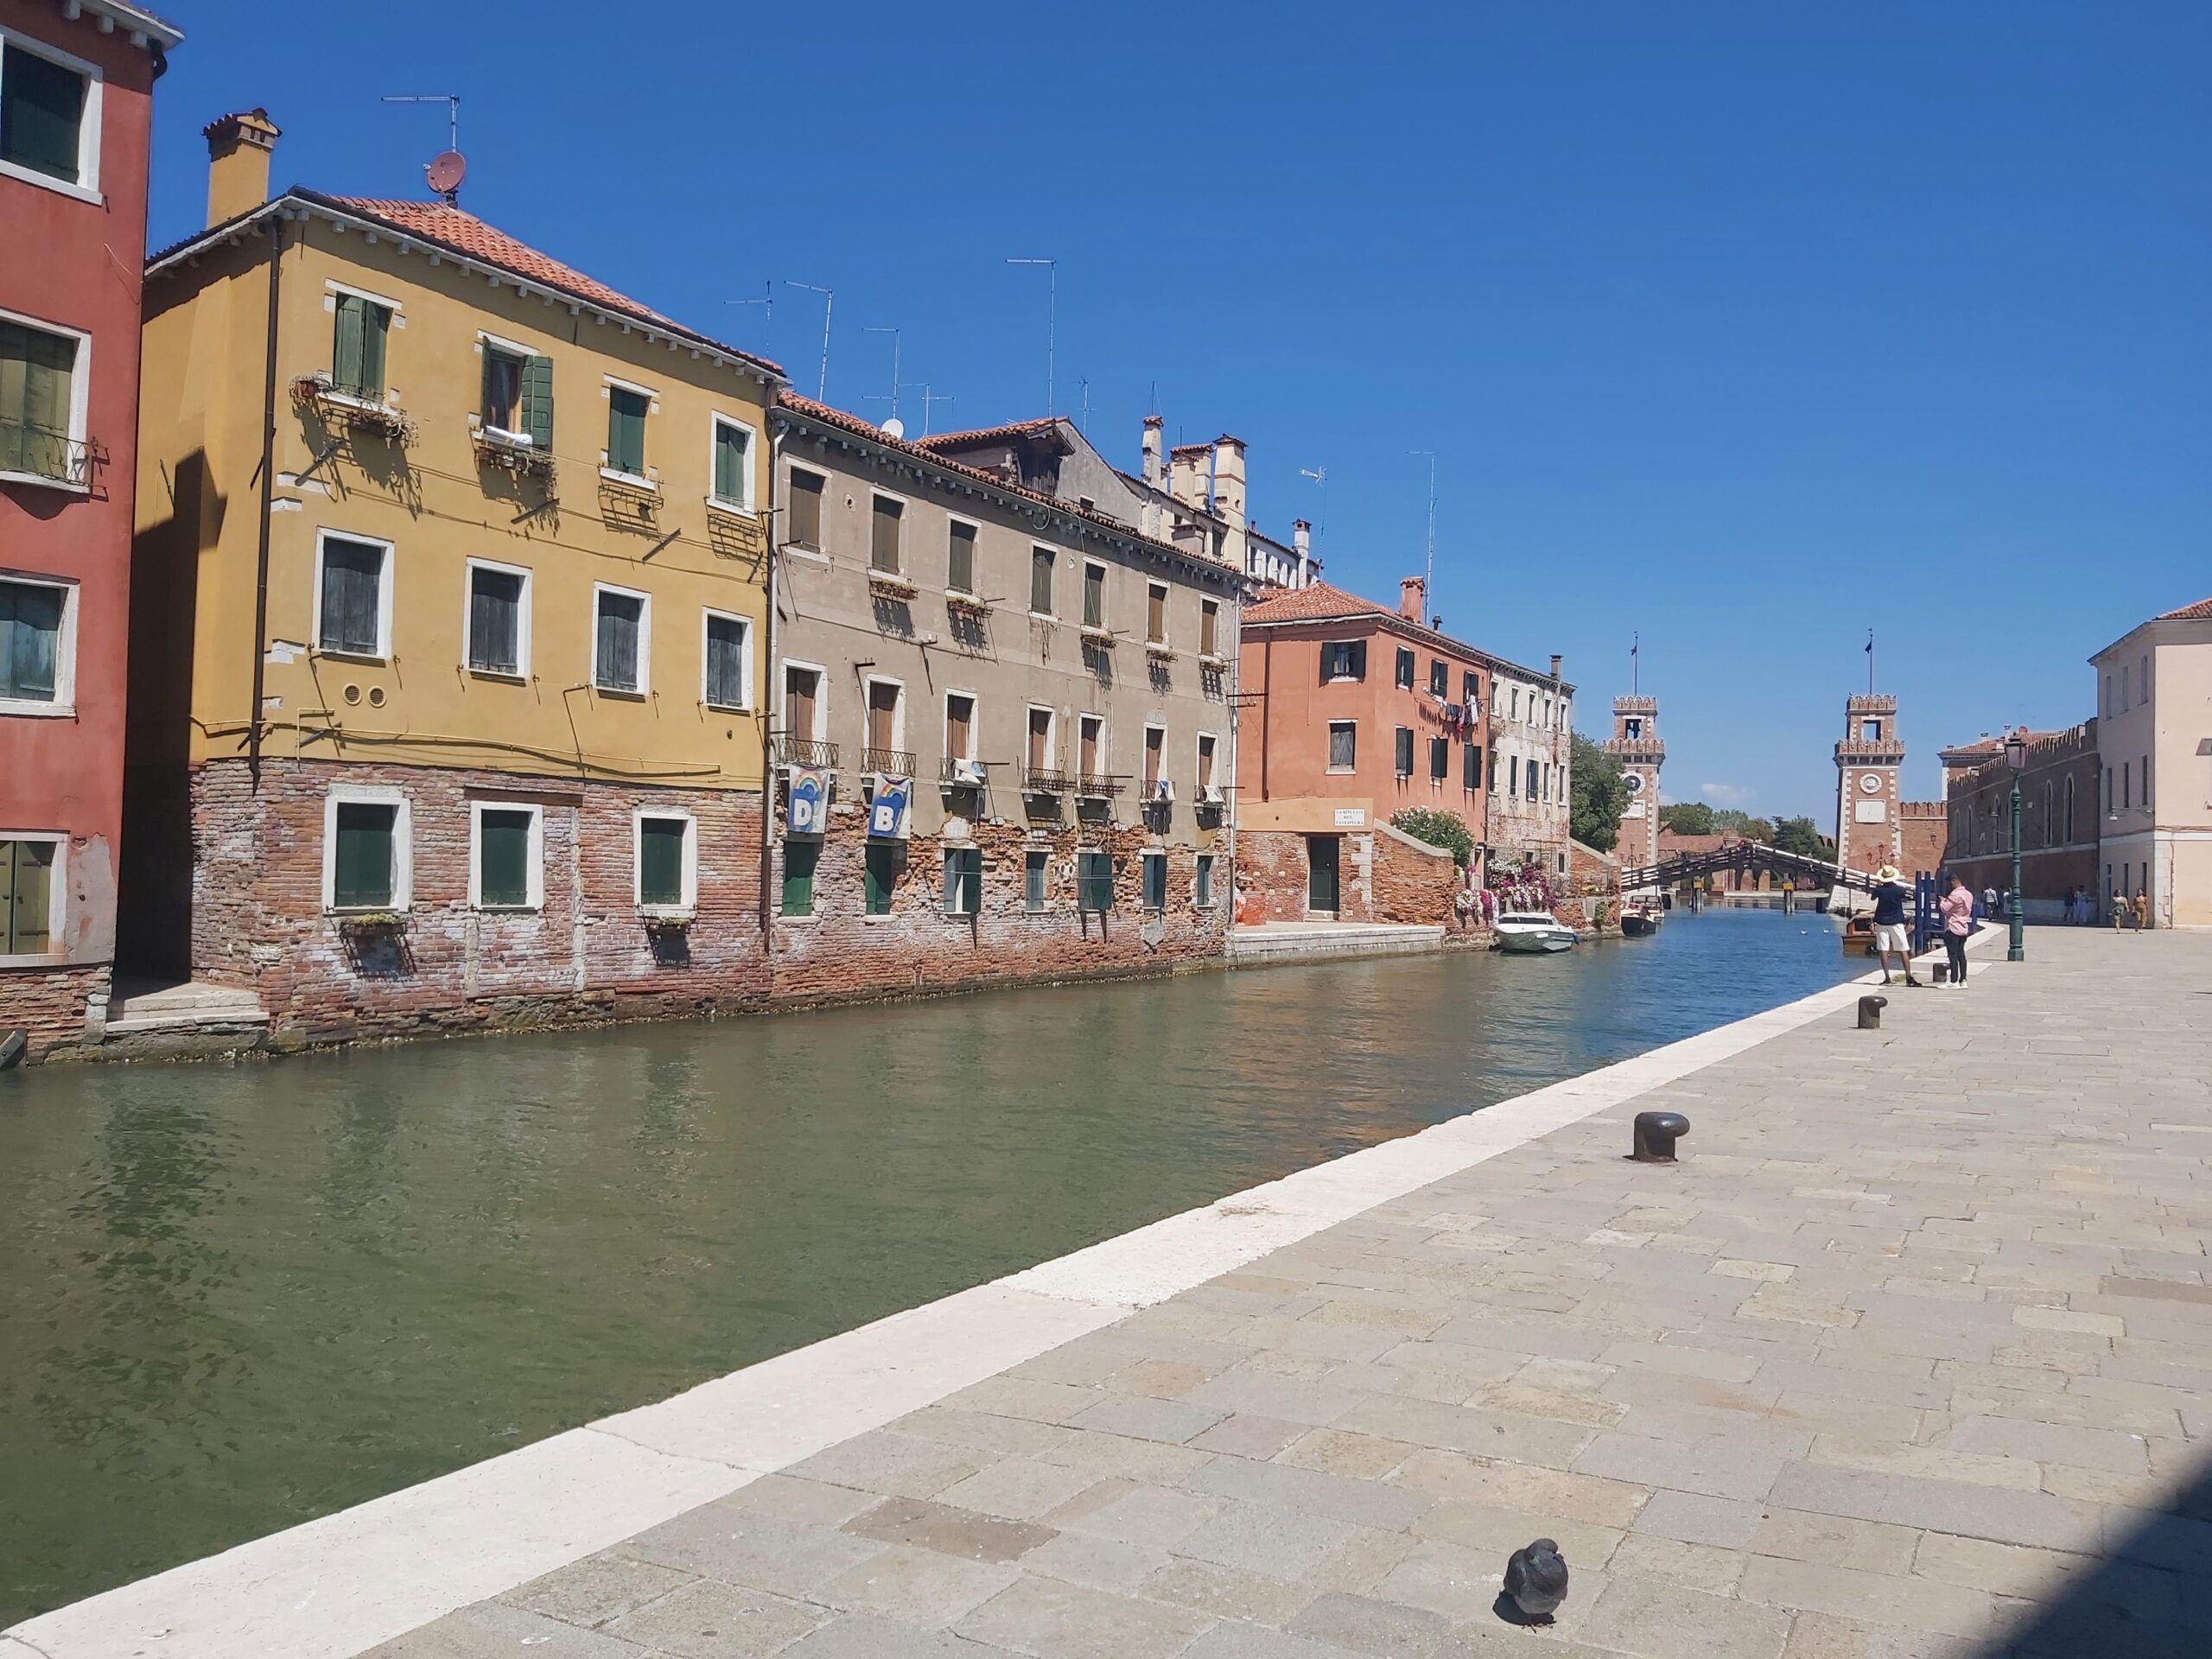 A canal view with The Venetian Arsenal and colourful buildings in Venice, Italy